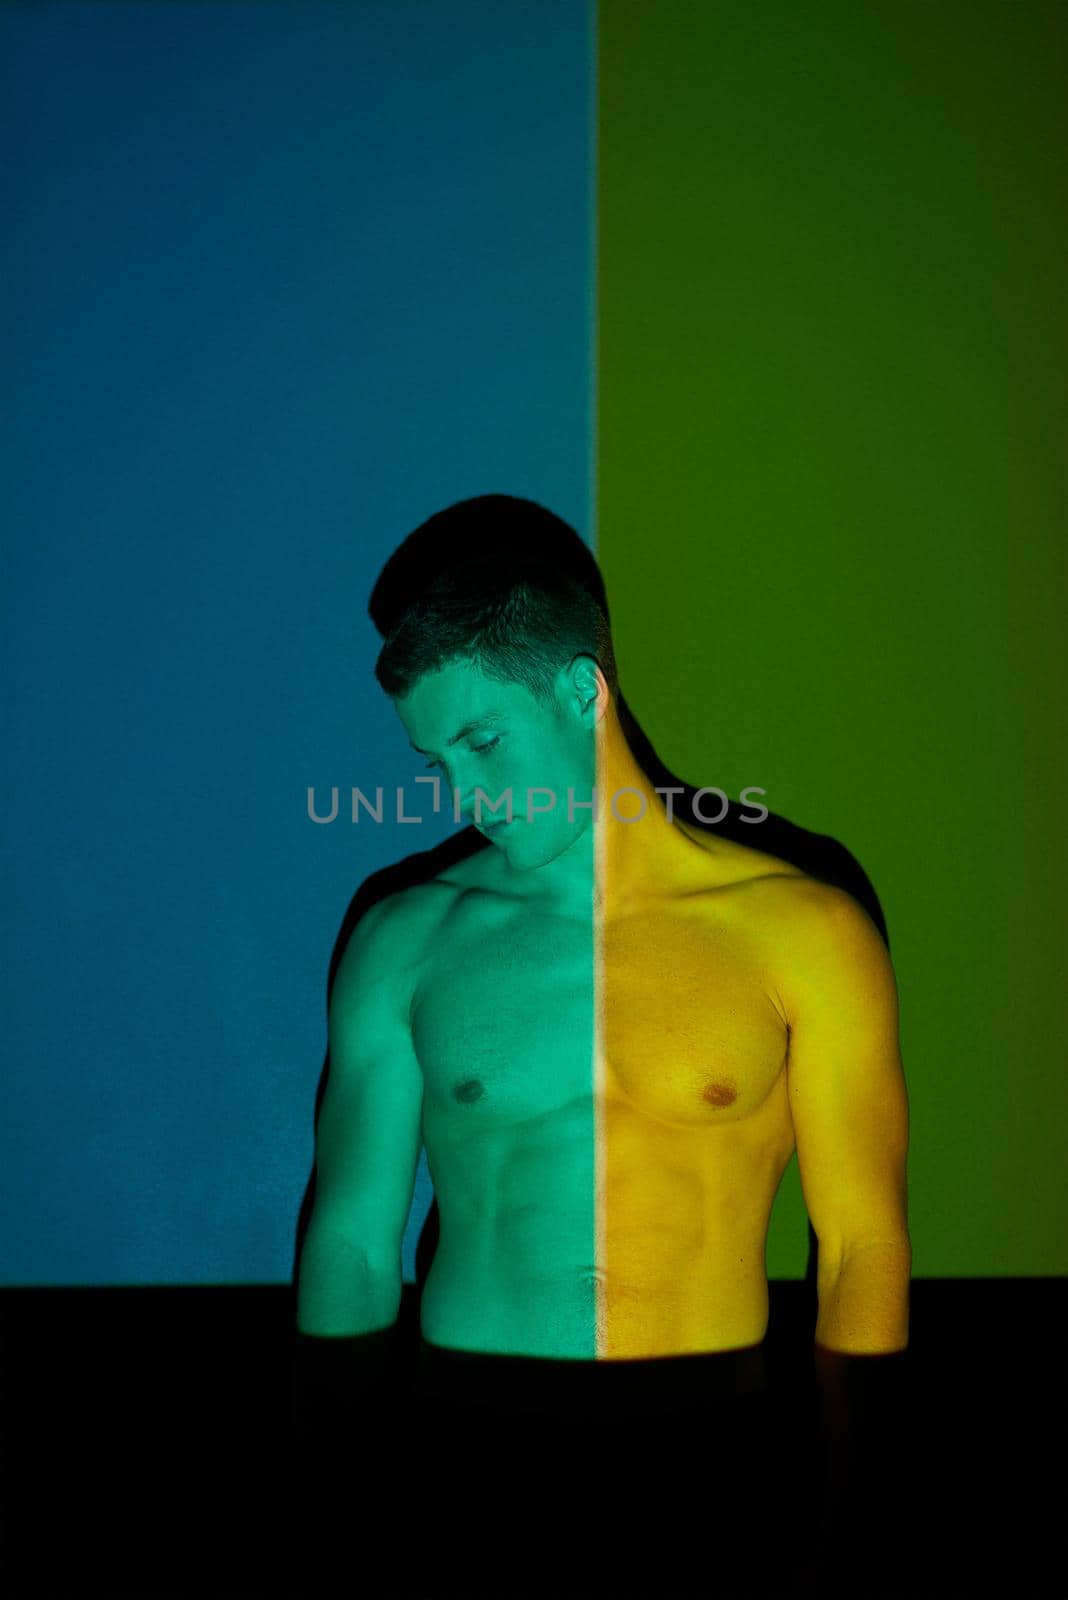 The light eventually exposes what you want to hide. Studio shot of a young man posing against abstract lighting. by YuriArcurs